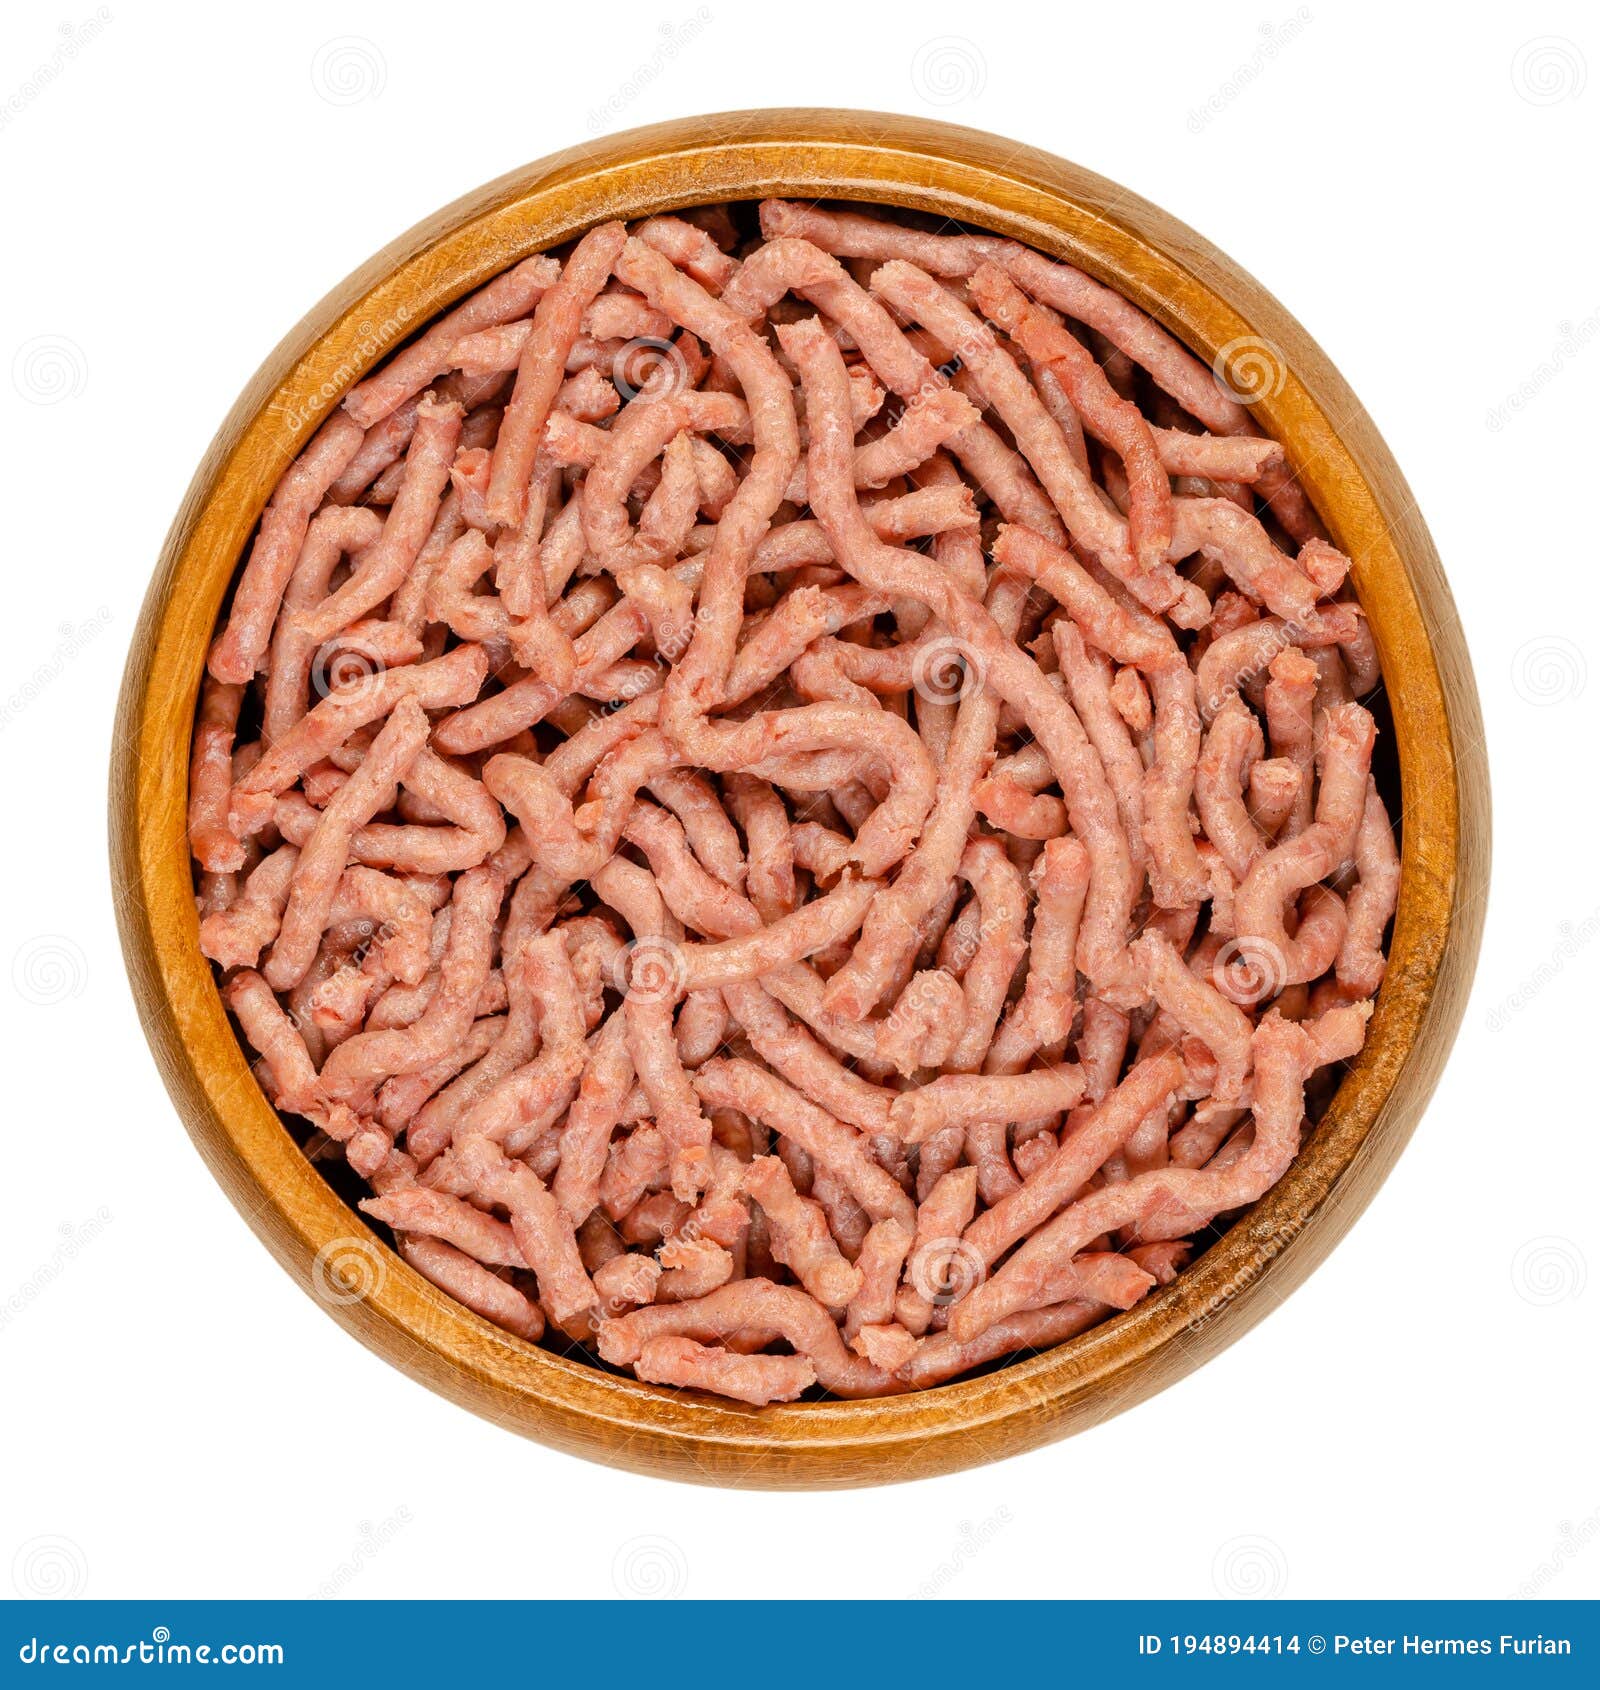 vegan ground meat, a substitute for minced meat, in a wooden bowl